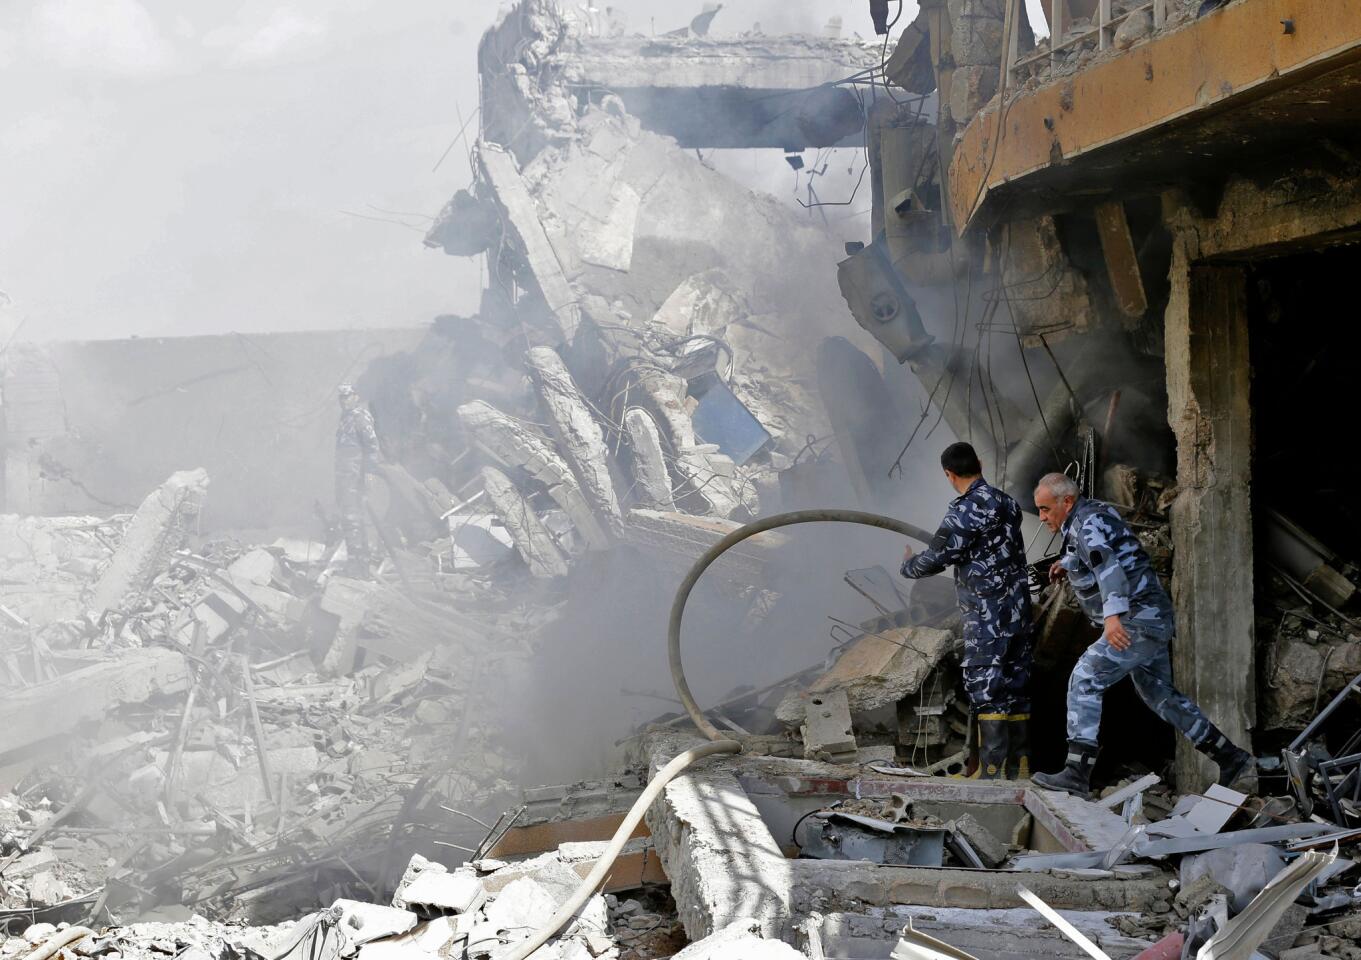 Syrian soldiers inspect the wreckage of a building described as part of the Scientific Studies and Research Centre (SSRC) compound in the Barzeh district, north of Damascus, during a press tour organized by the Syrian information ministry, on April 14, 2018. The United States, Britain and France launched strikes against Syrian President Bashar Assad's regime early on April 14, 2018, in response to an alleged chemical weapons attack after mulling military action for nearly a week.